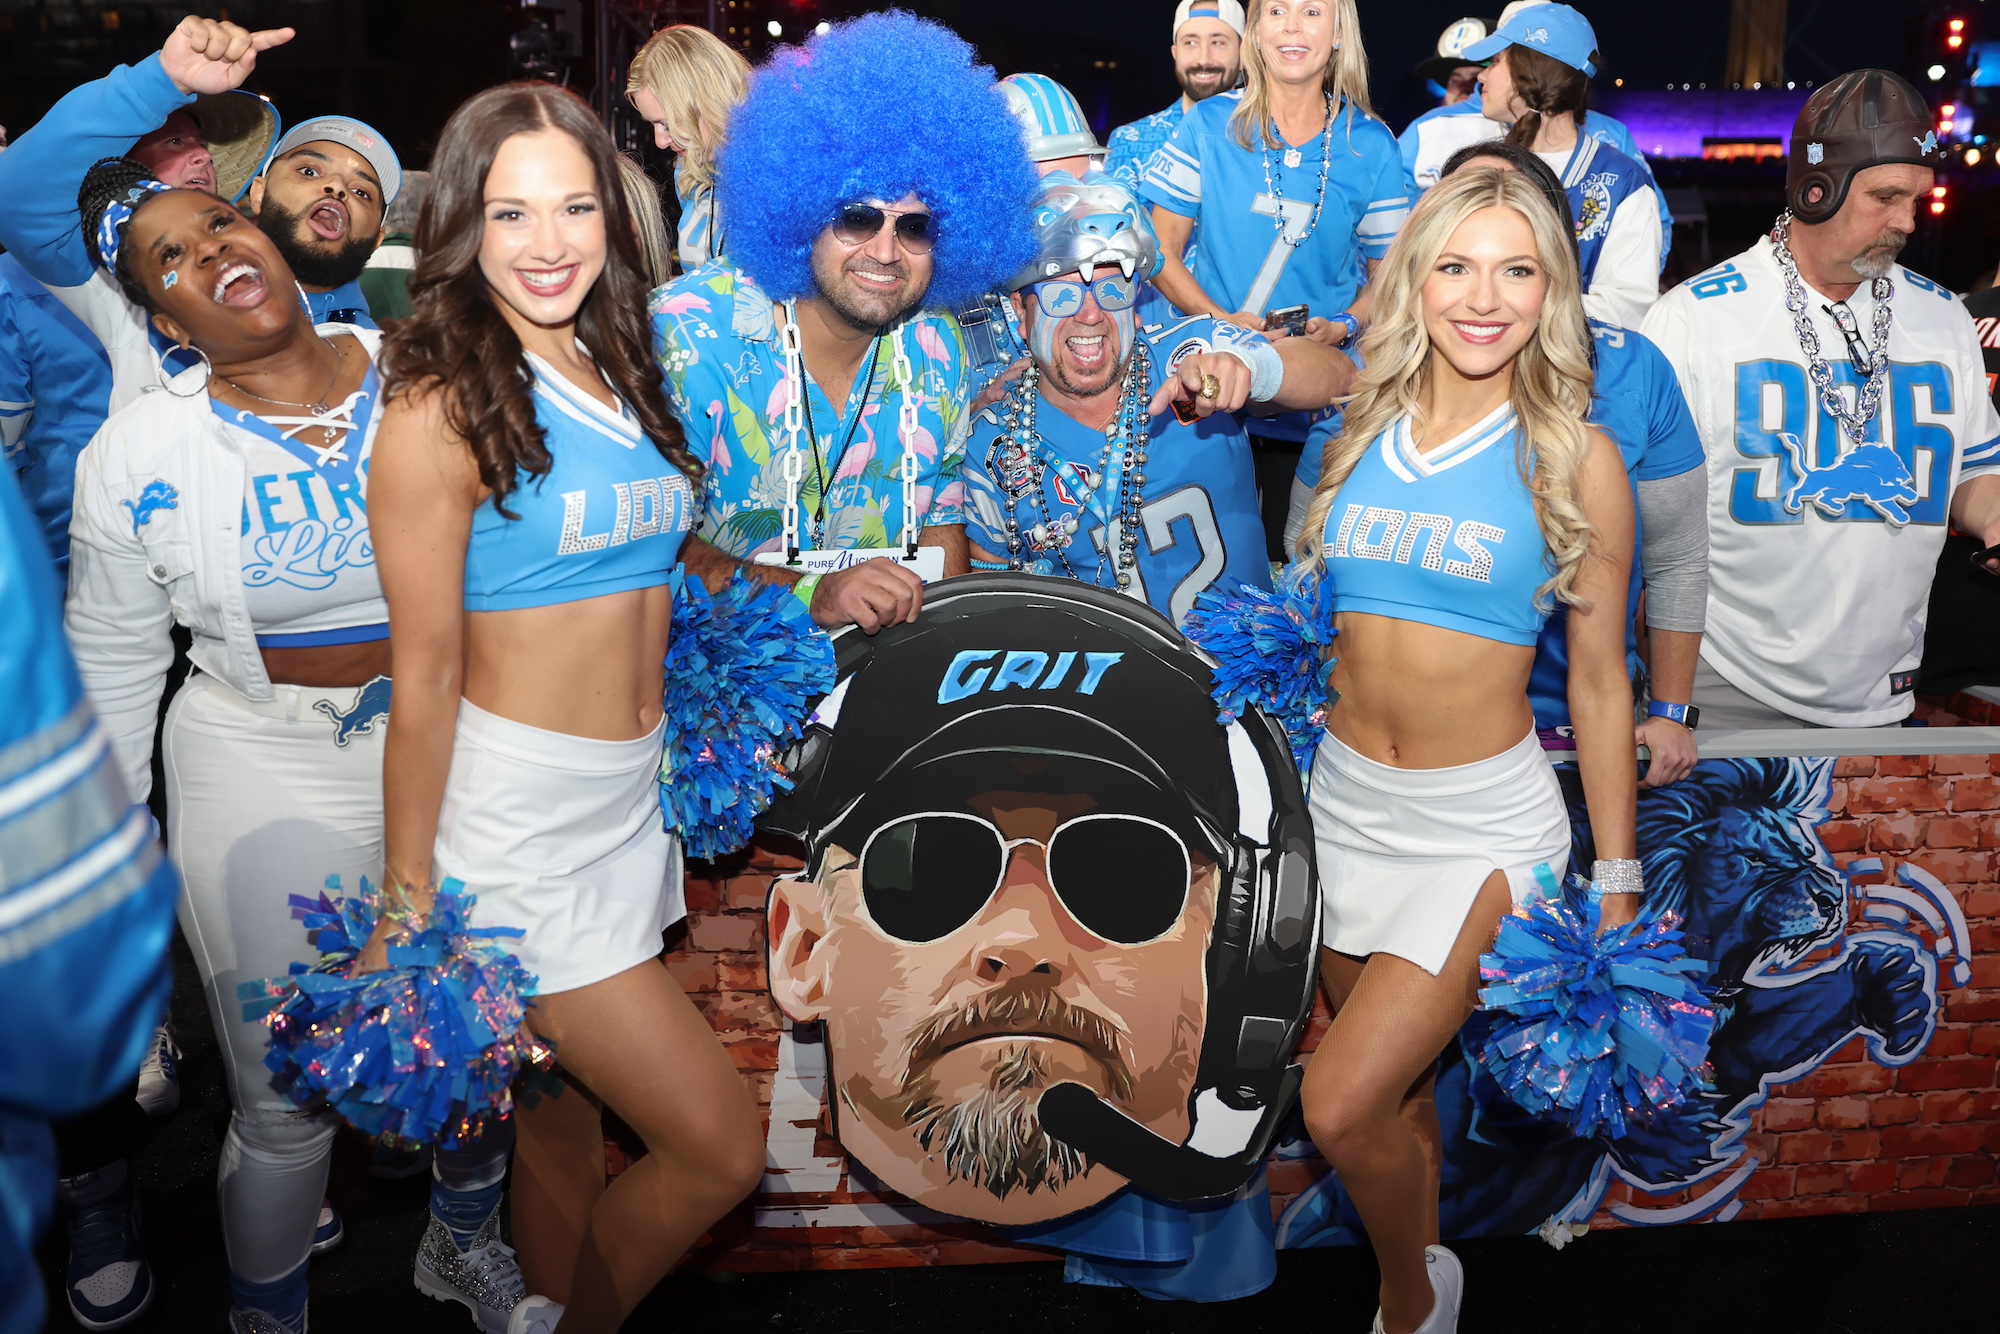 KANSAS CITY, MO - APRIL 27: Detroit Lions fans and cheerleaders in the first round of the NFL Draft on April 27, 2023 at Union Station in Kansas City, MO. (Photo by Scott Winters/Icon Sportswire)